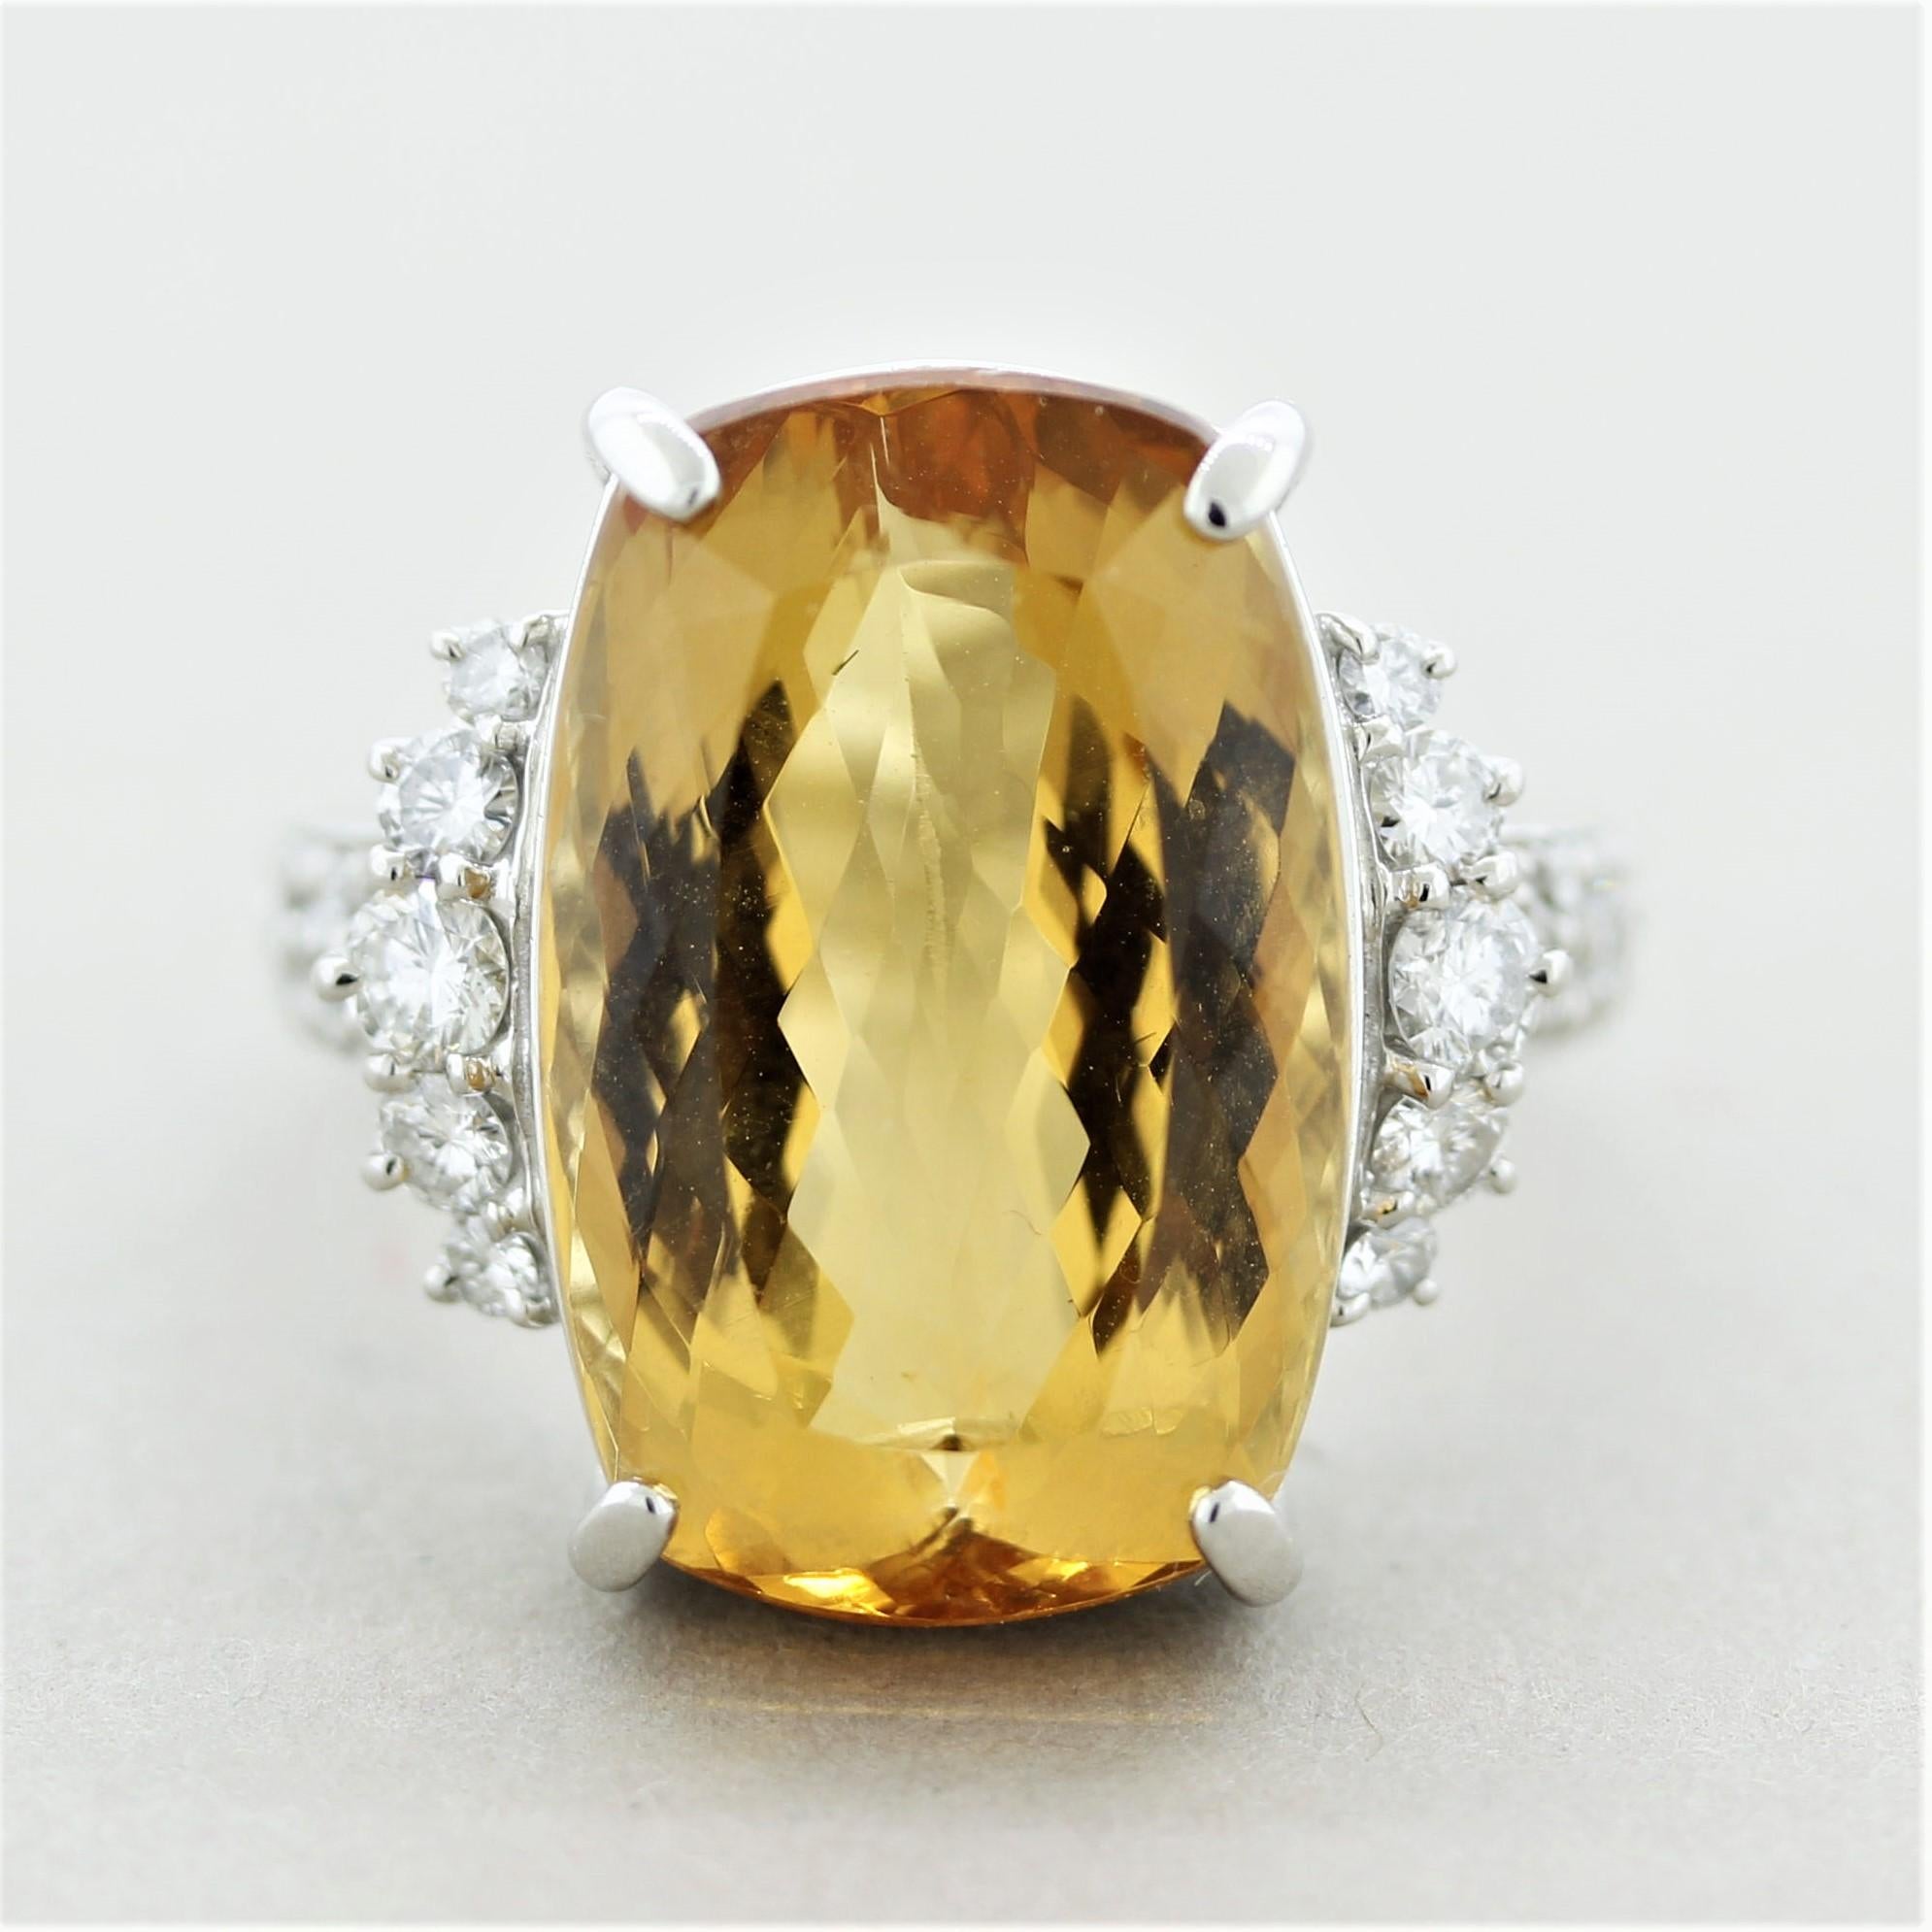 A special ring featuring a large, beautiful, and rare gemstone. It is an imperial topaz weighing a substantial 21.65 carats. It has the ideal yellow-orange gold color that is highly desirable with no eye-visible inclusions allowing the stones